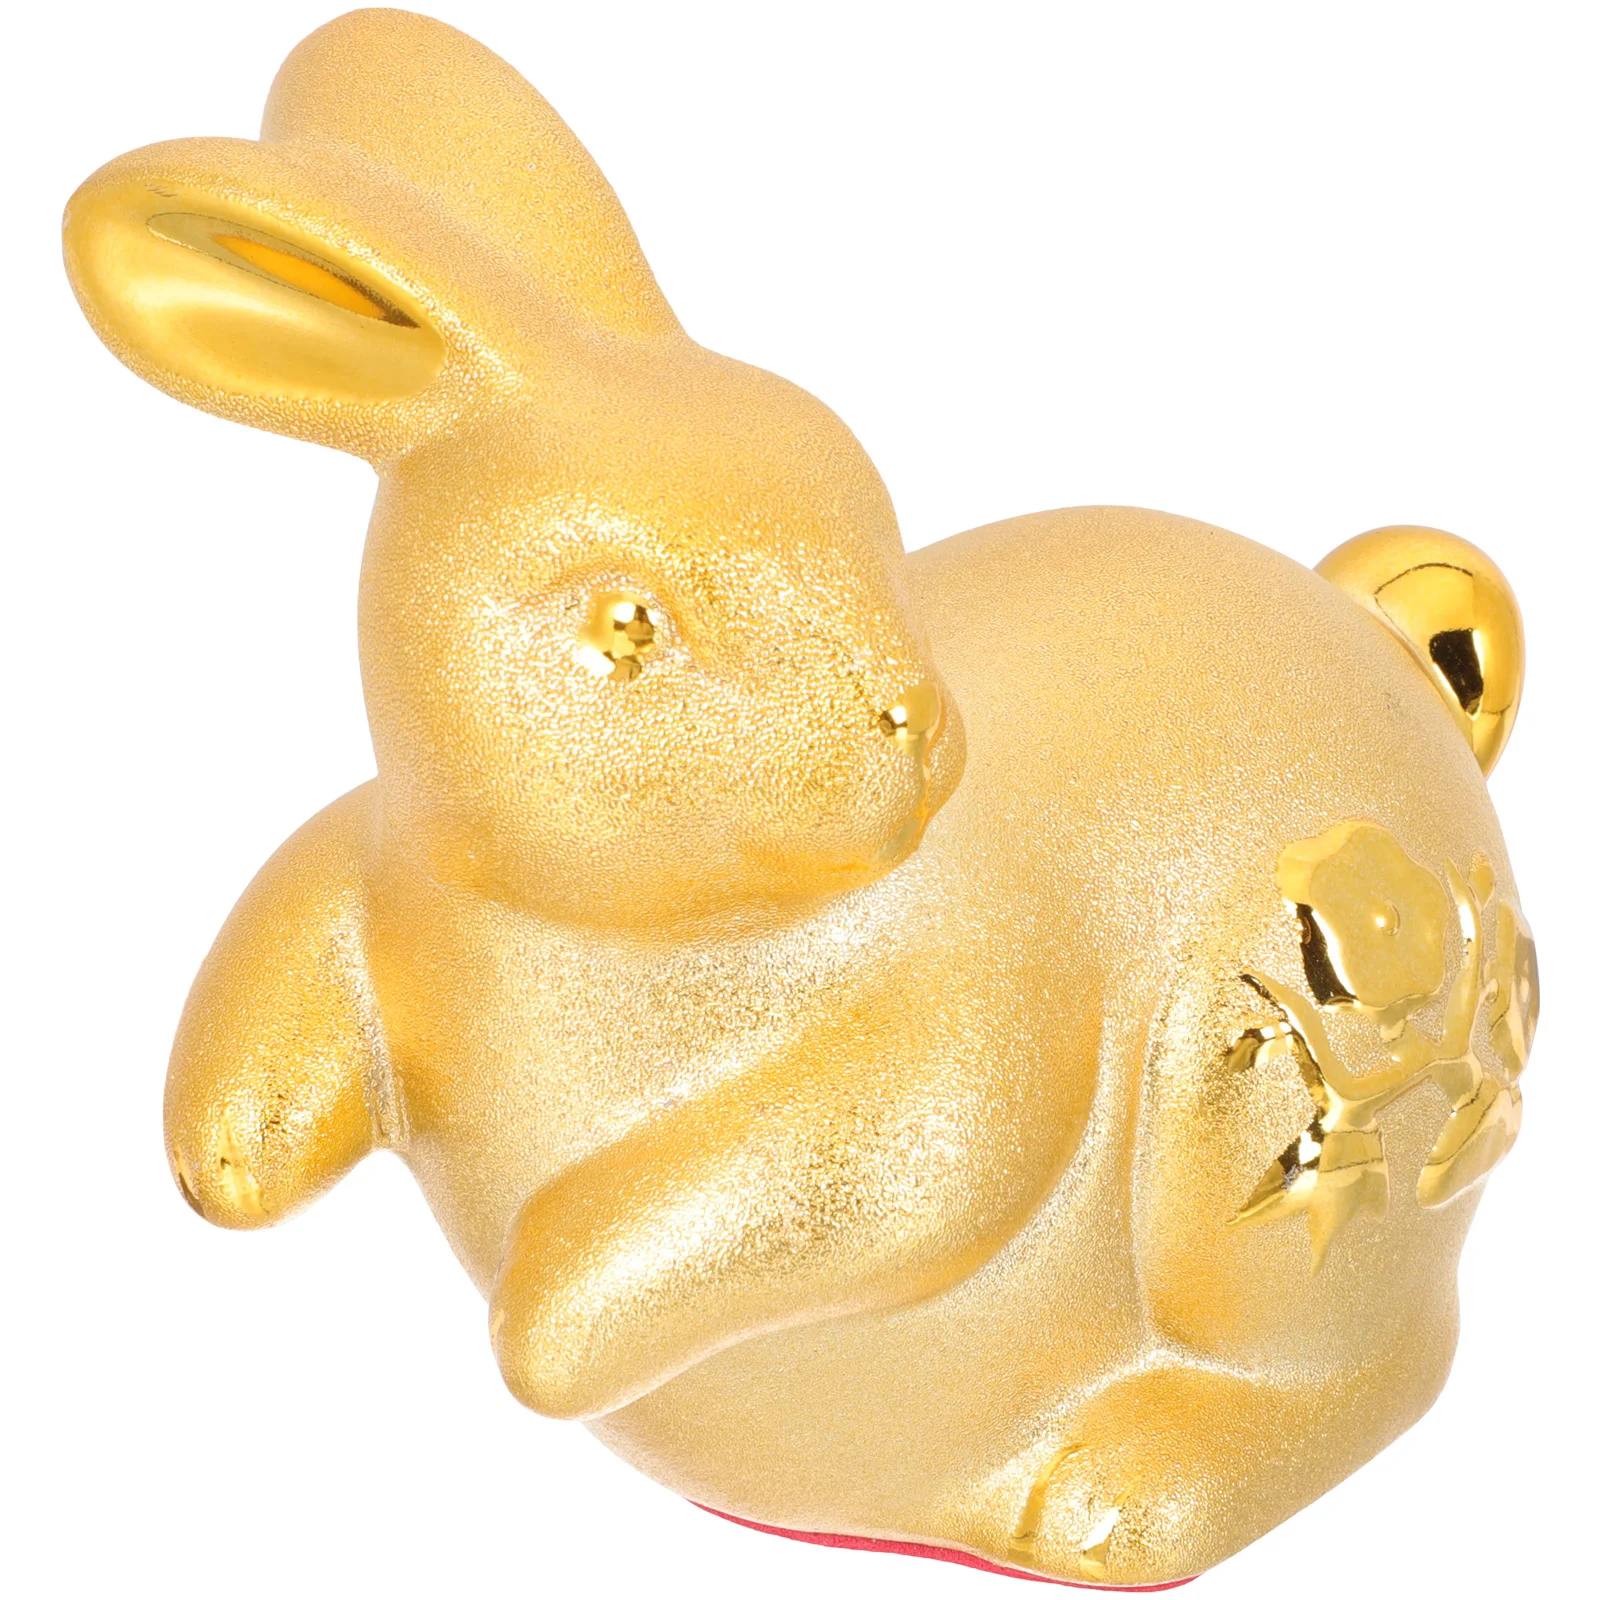 

Rabbit Chinese Statue Year Figurine Bank Zodiac Bunny Piggy Decor Figurines Animal New Shui Feng Ornament Lucky Figures Thecoin